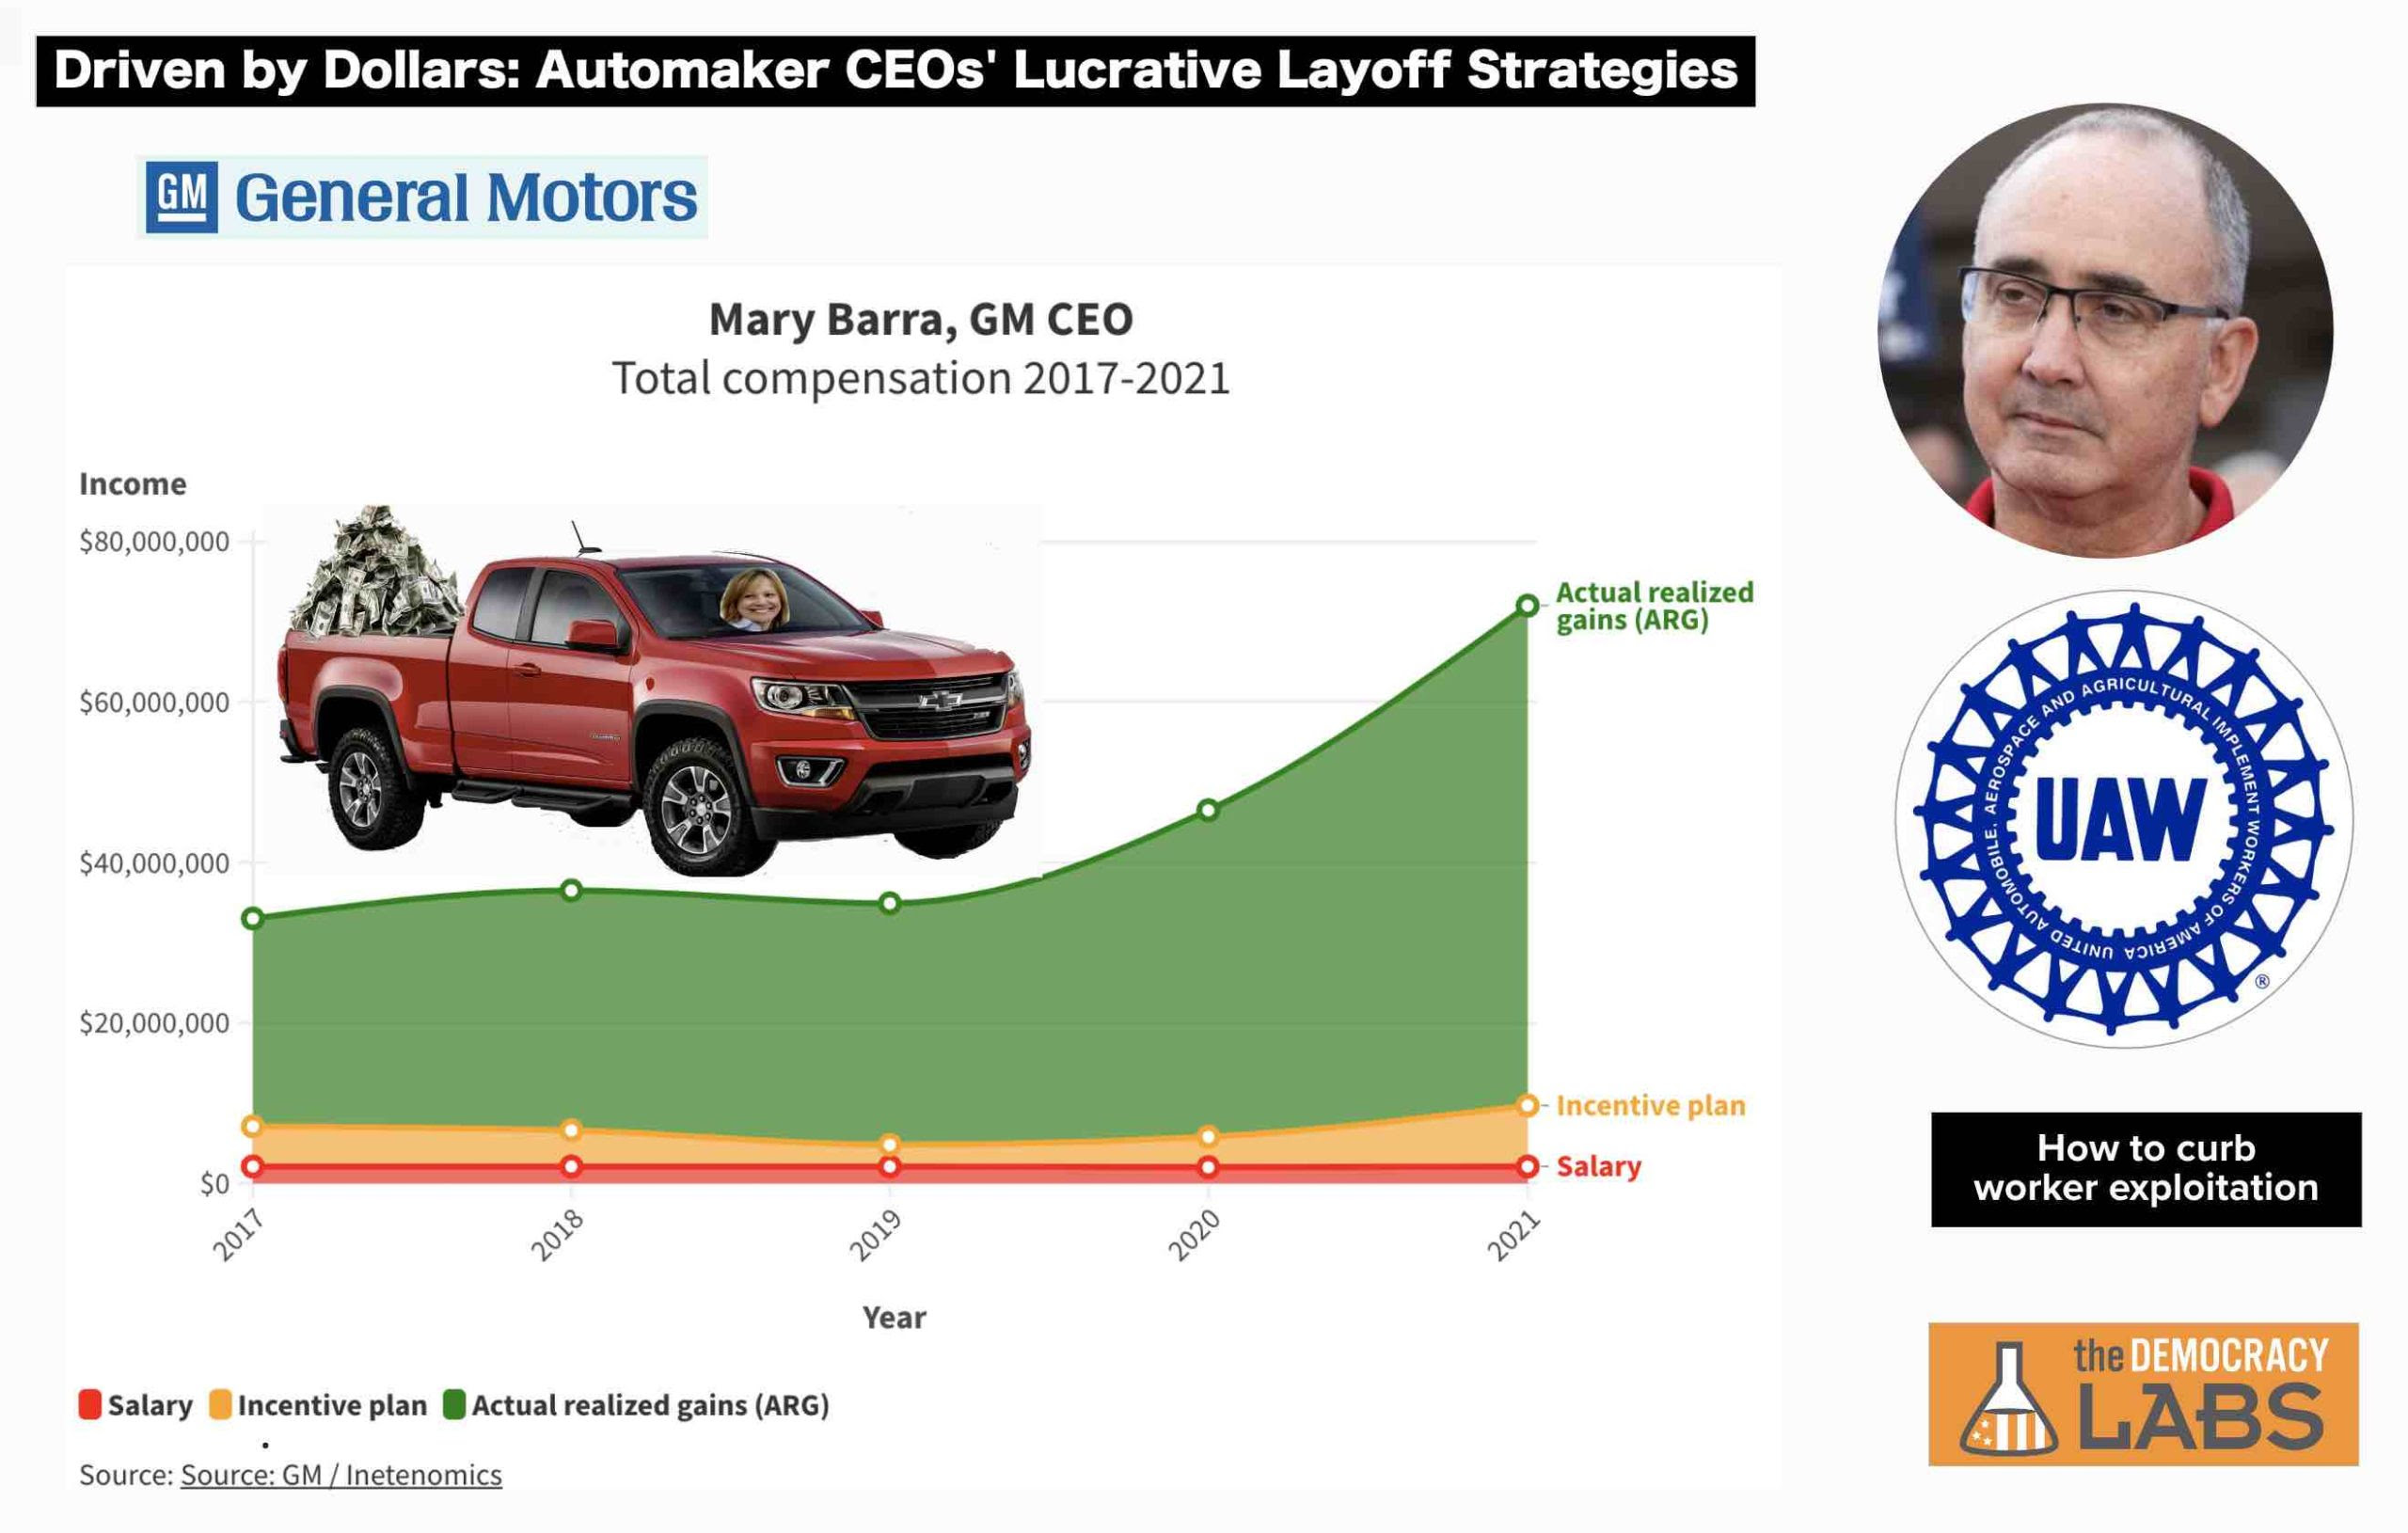 Automaker CEOs exploit their workers